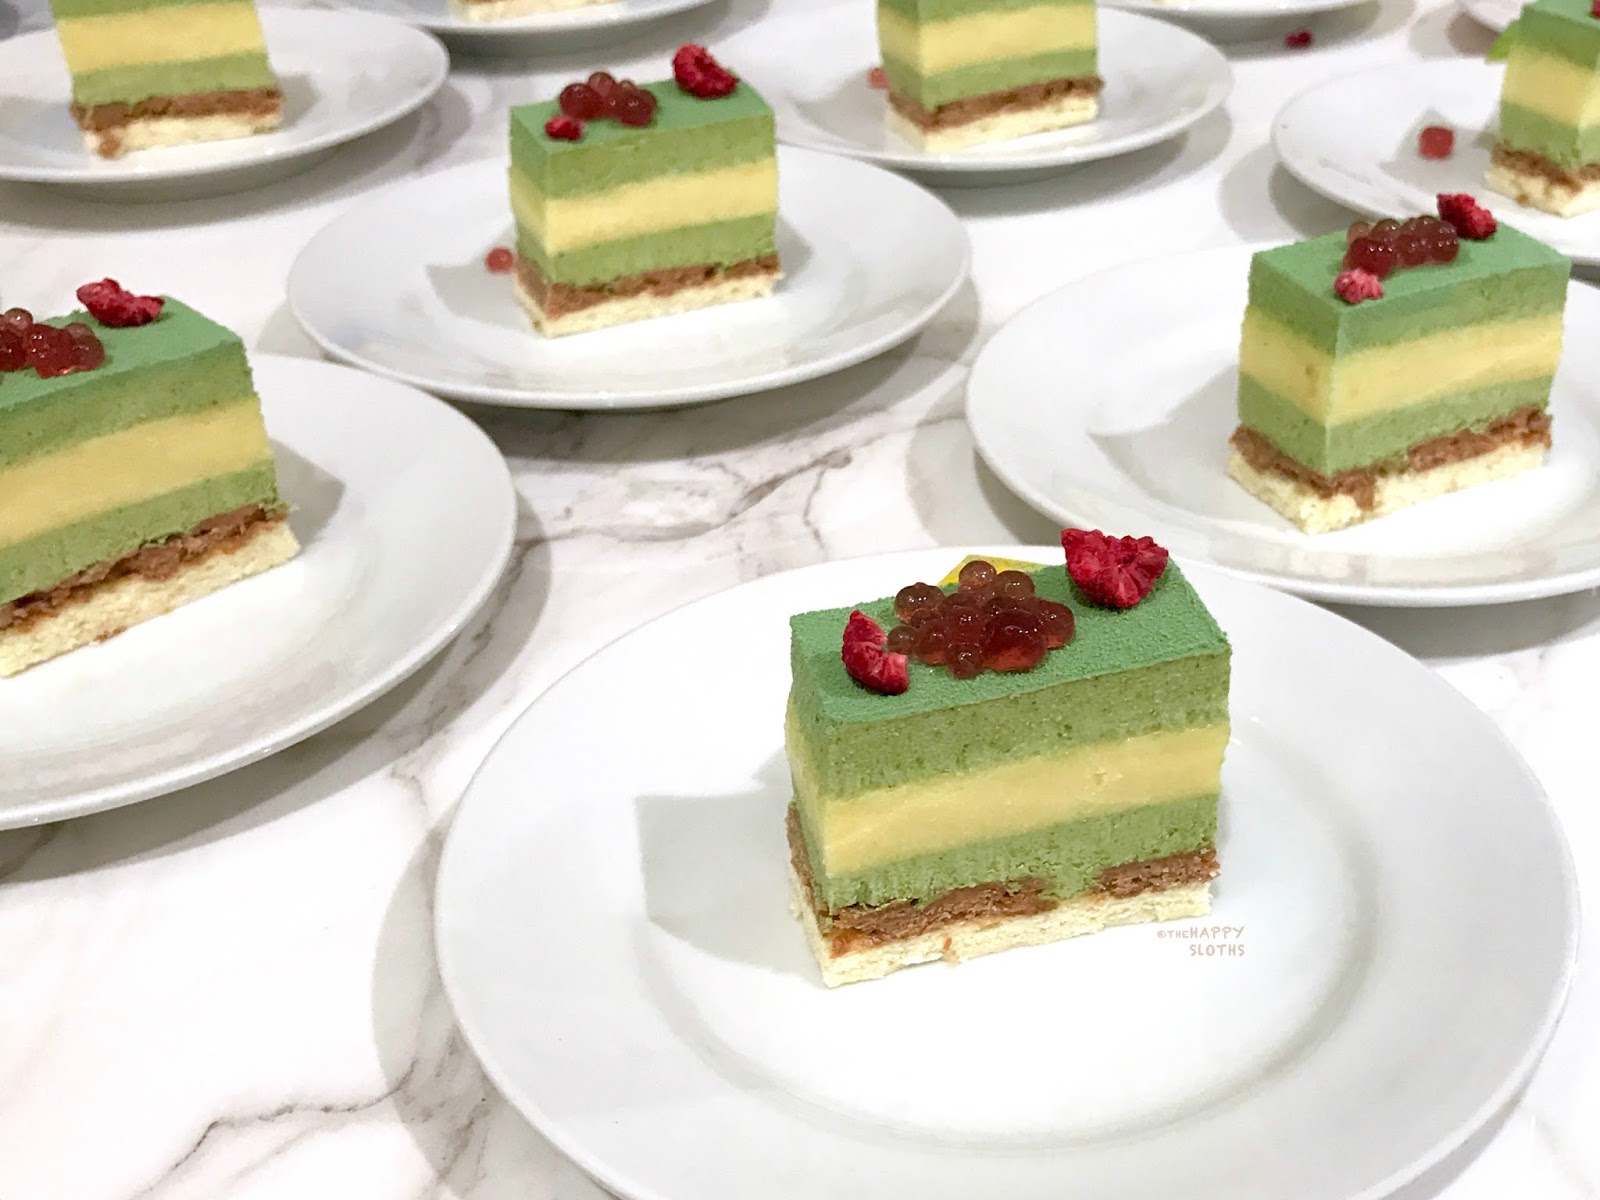 EAT! Pastry | Matcha Yuzu Cake from Temper Pastry